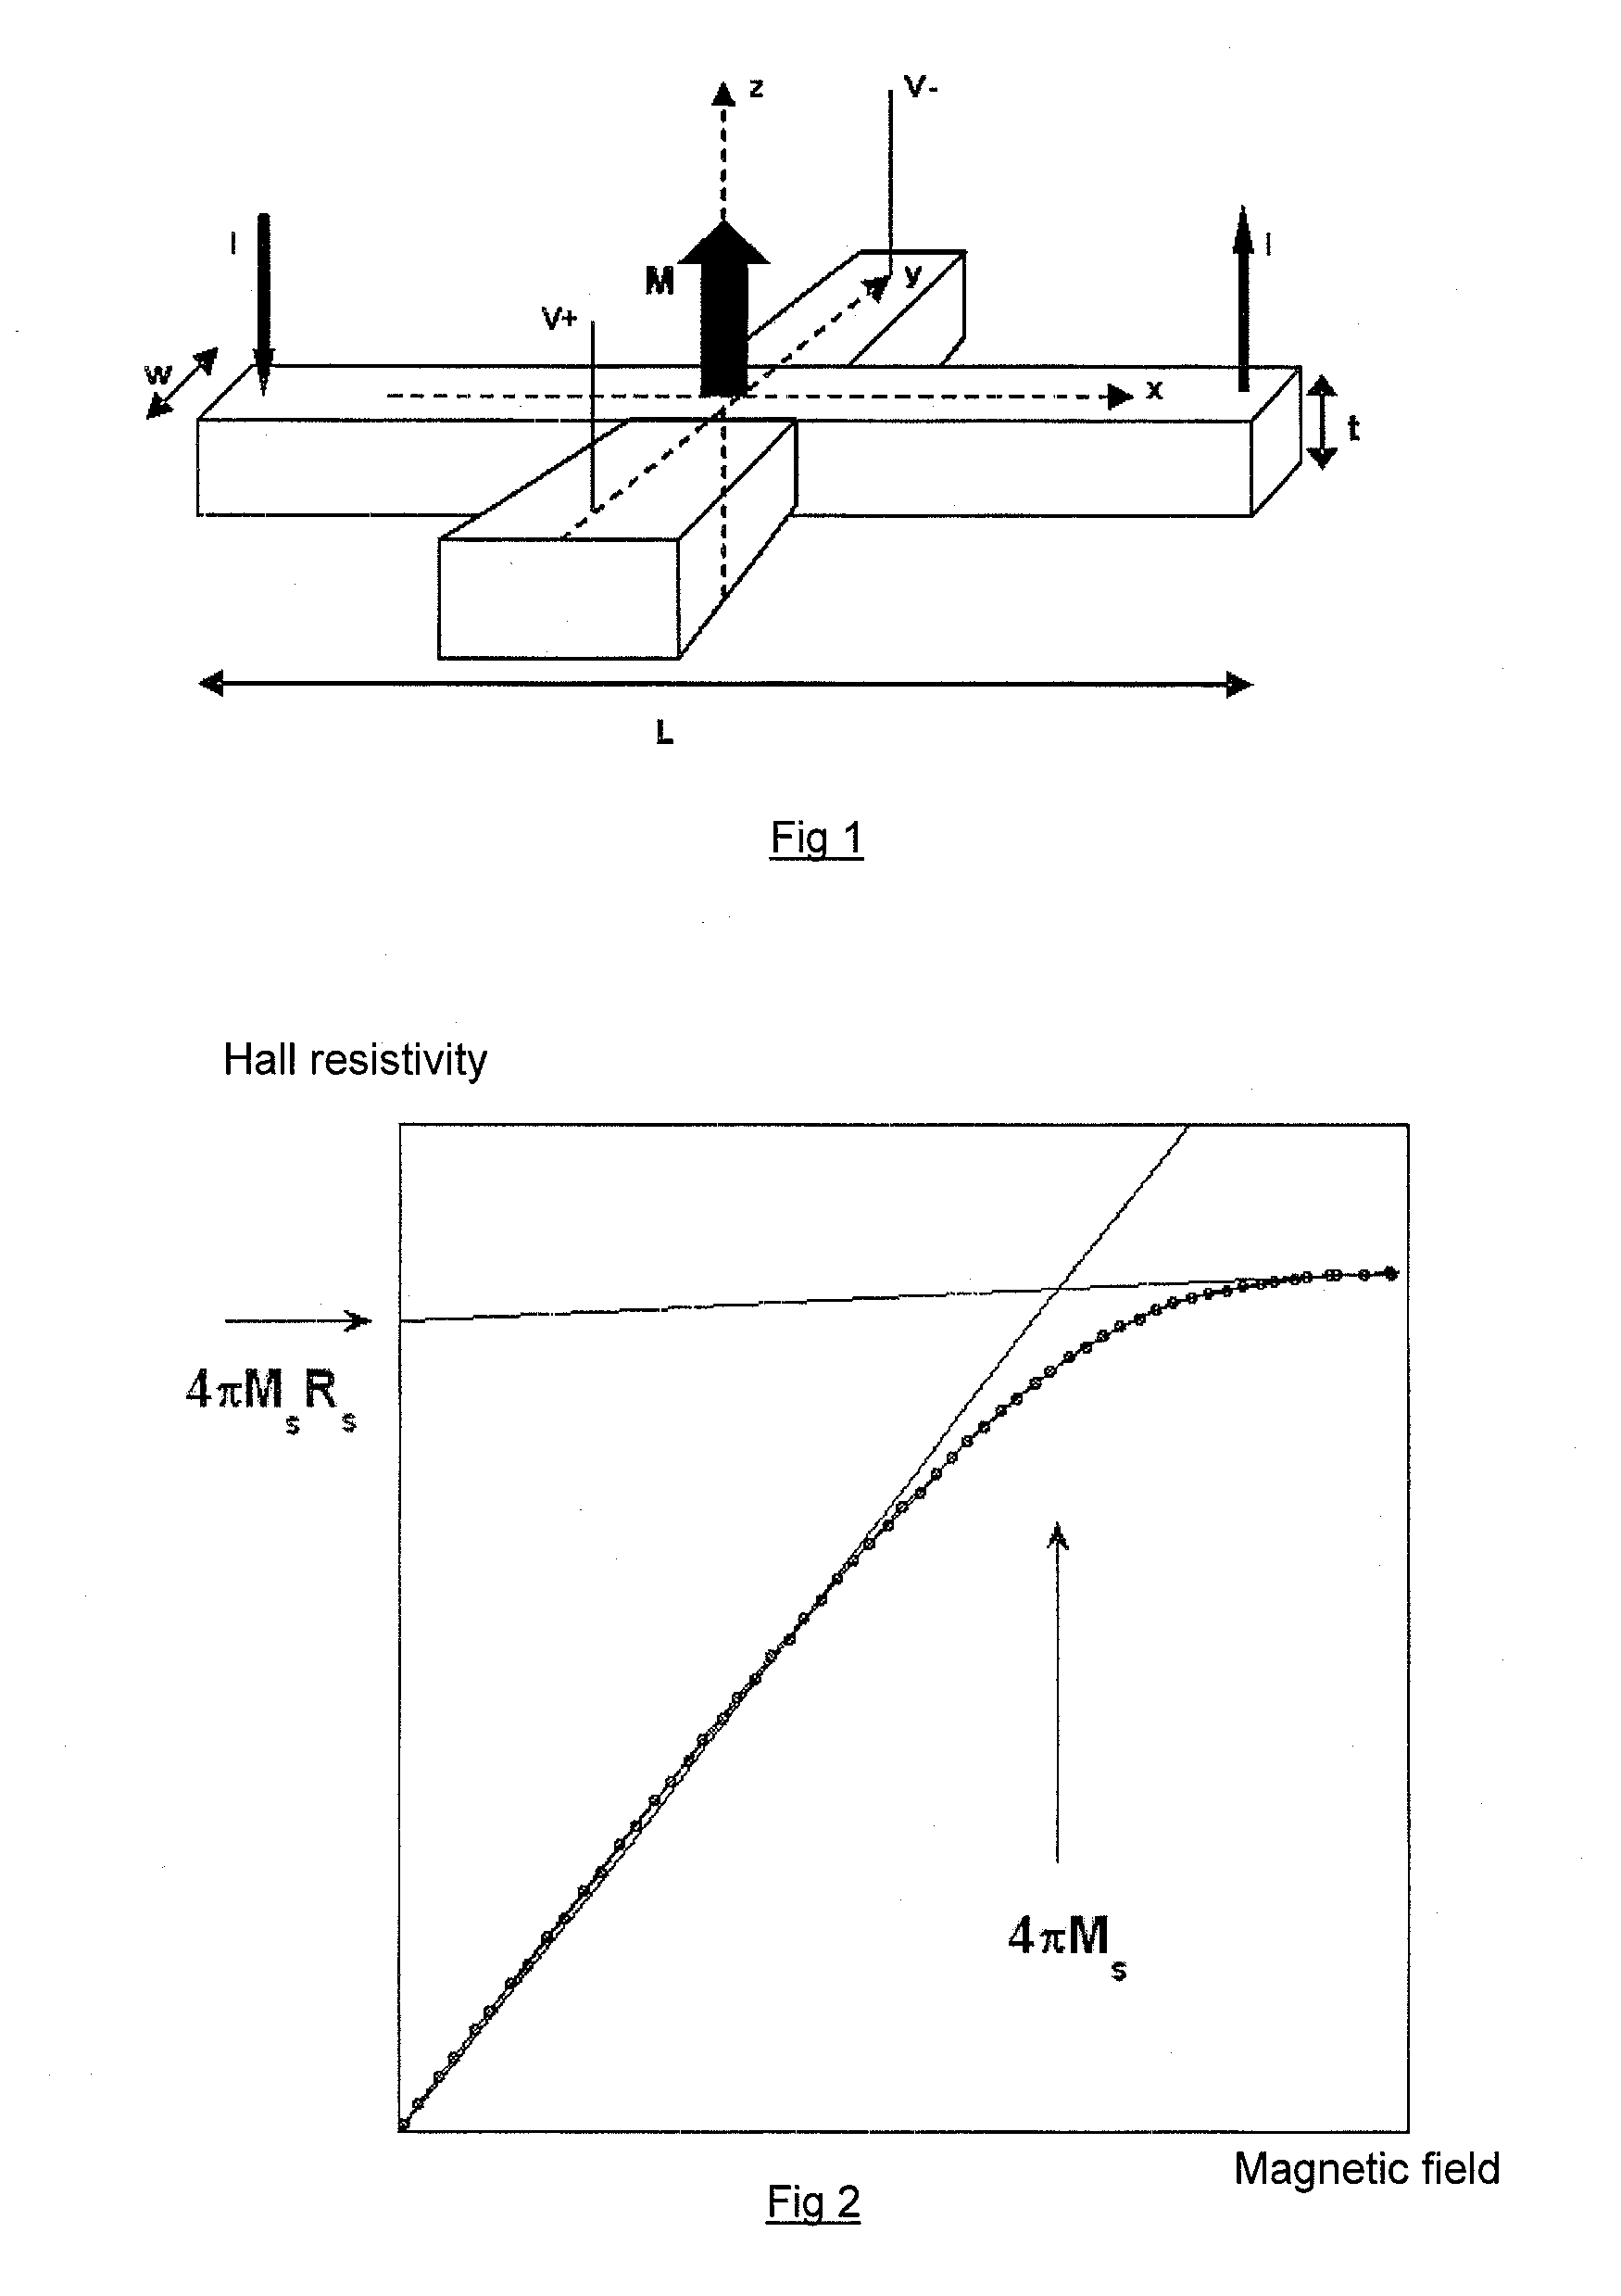 Magnetic multilayer device, method for producing such a device, magnetic field sensor, magnetic memory and logic gate using such a device